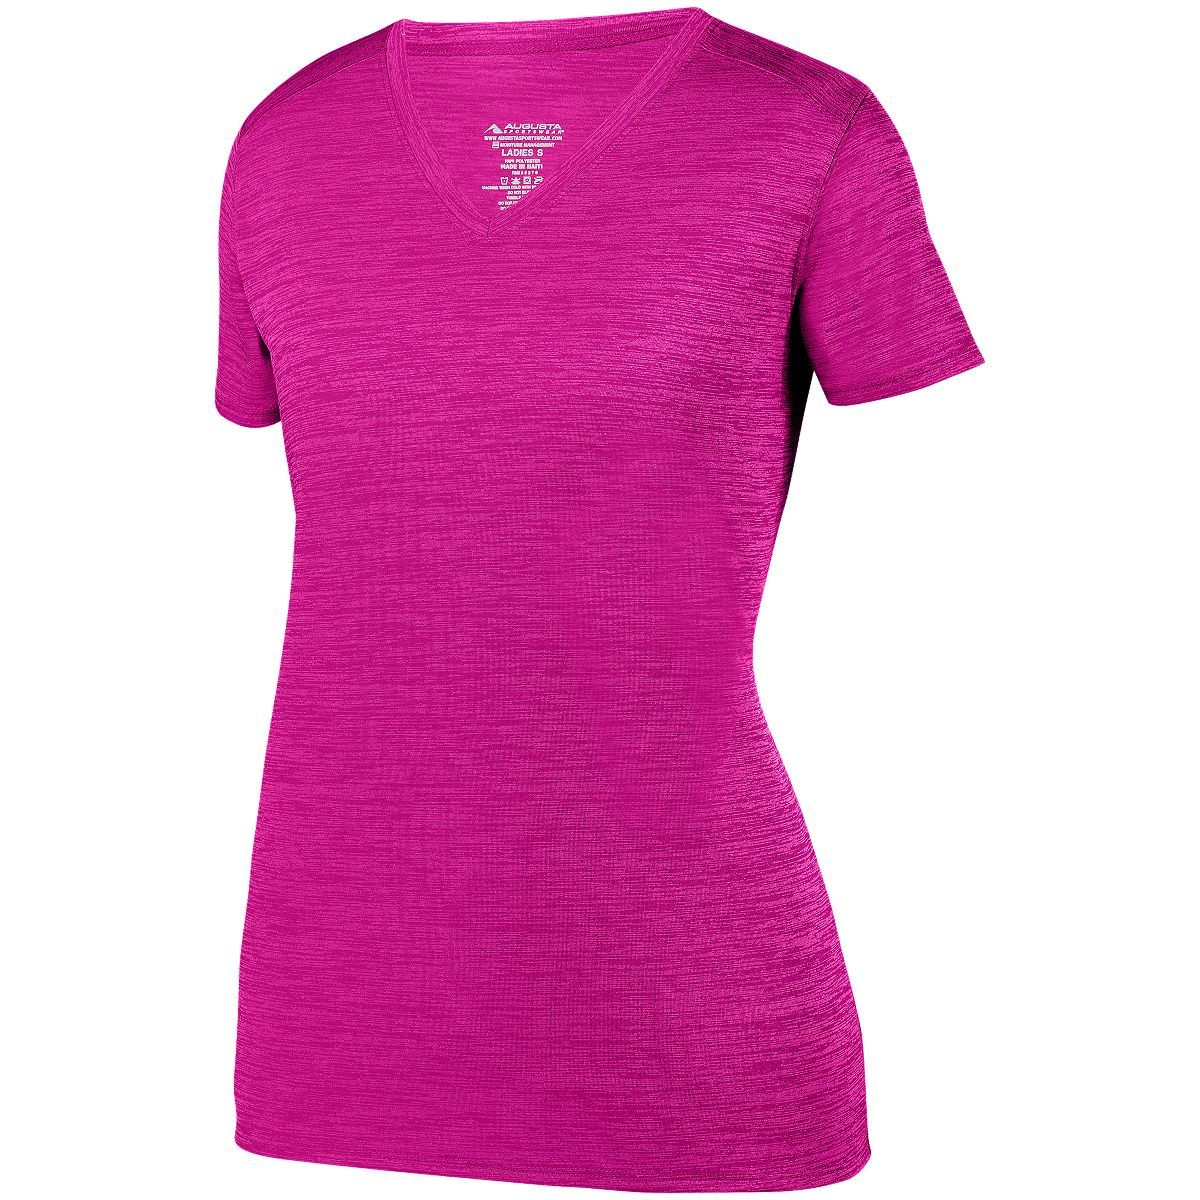 Augusta Sportswear Ladies Shadow Tonal Heather Training Tee in Power Pink  -Part of the Ladies, Ladies-Tee-Shirt, T-Shirts, Augusta-Products, Shirts, Tonal-Fleece-Collection product lines at KanaleyCreations.com